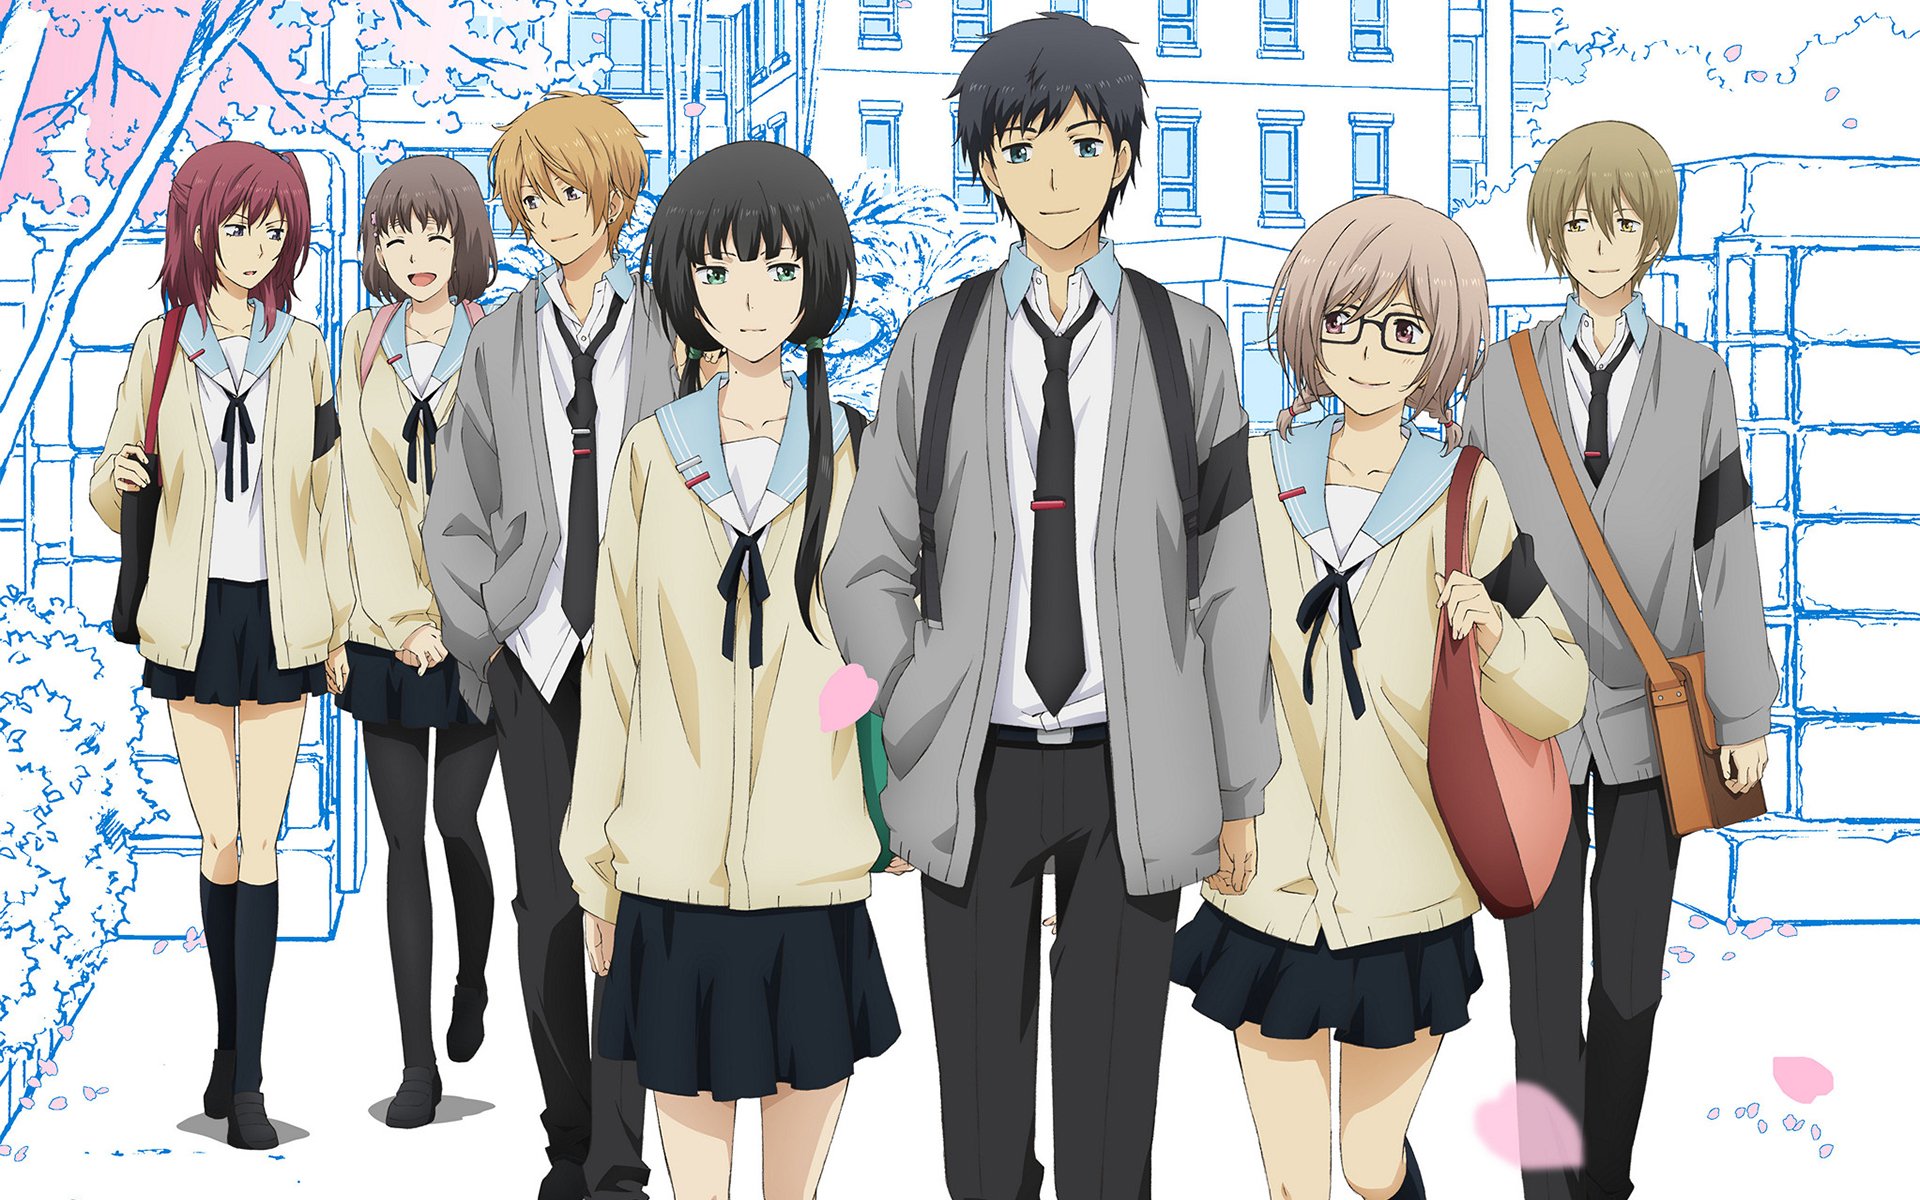 Anime ReLIFE HD Wallpaper by Yayoiso